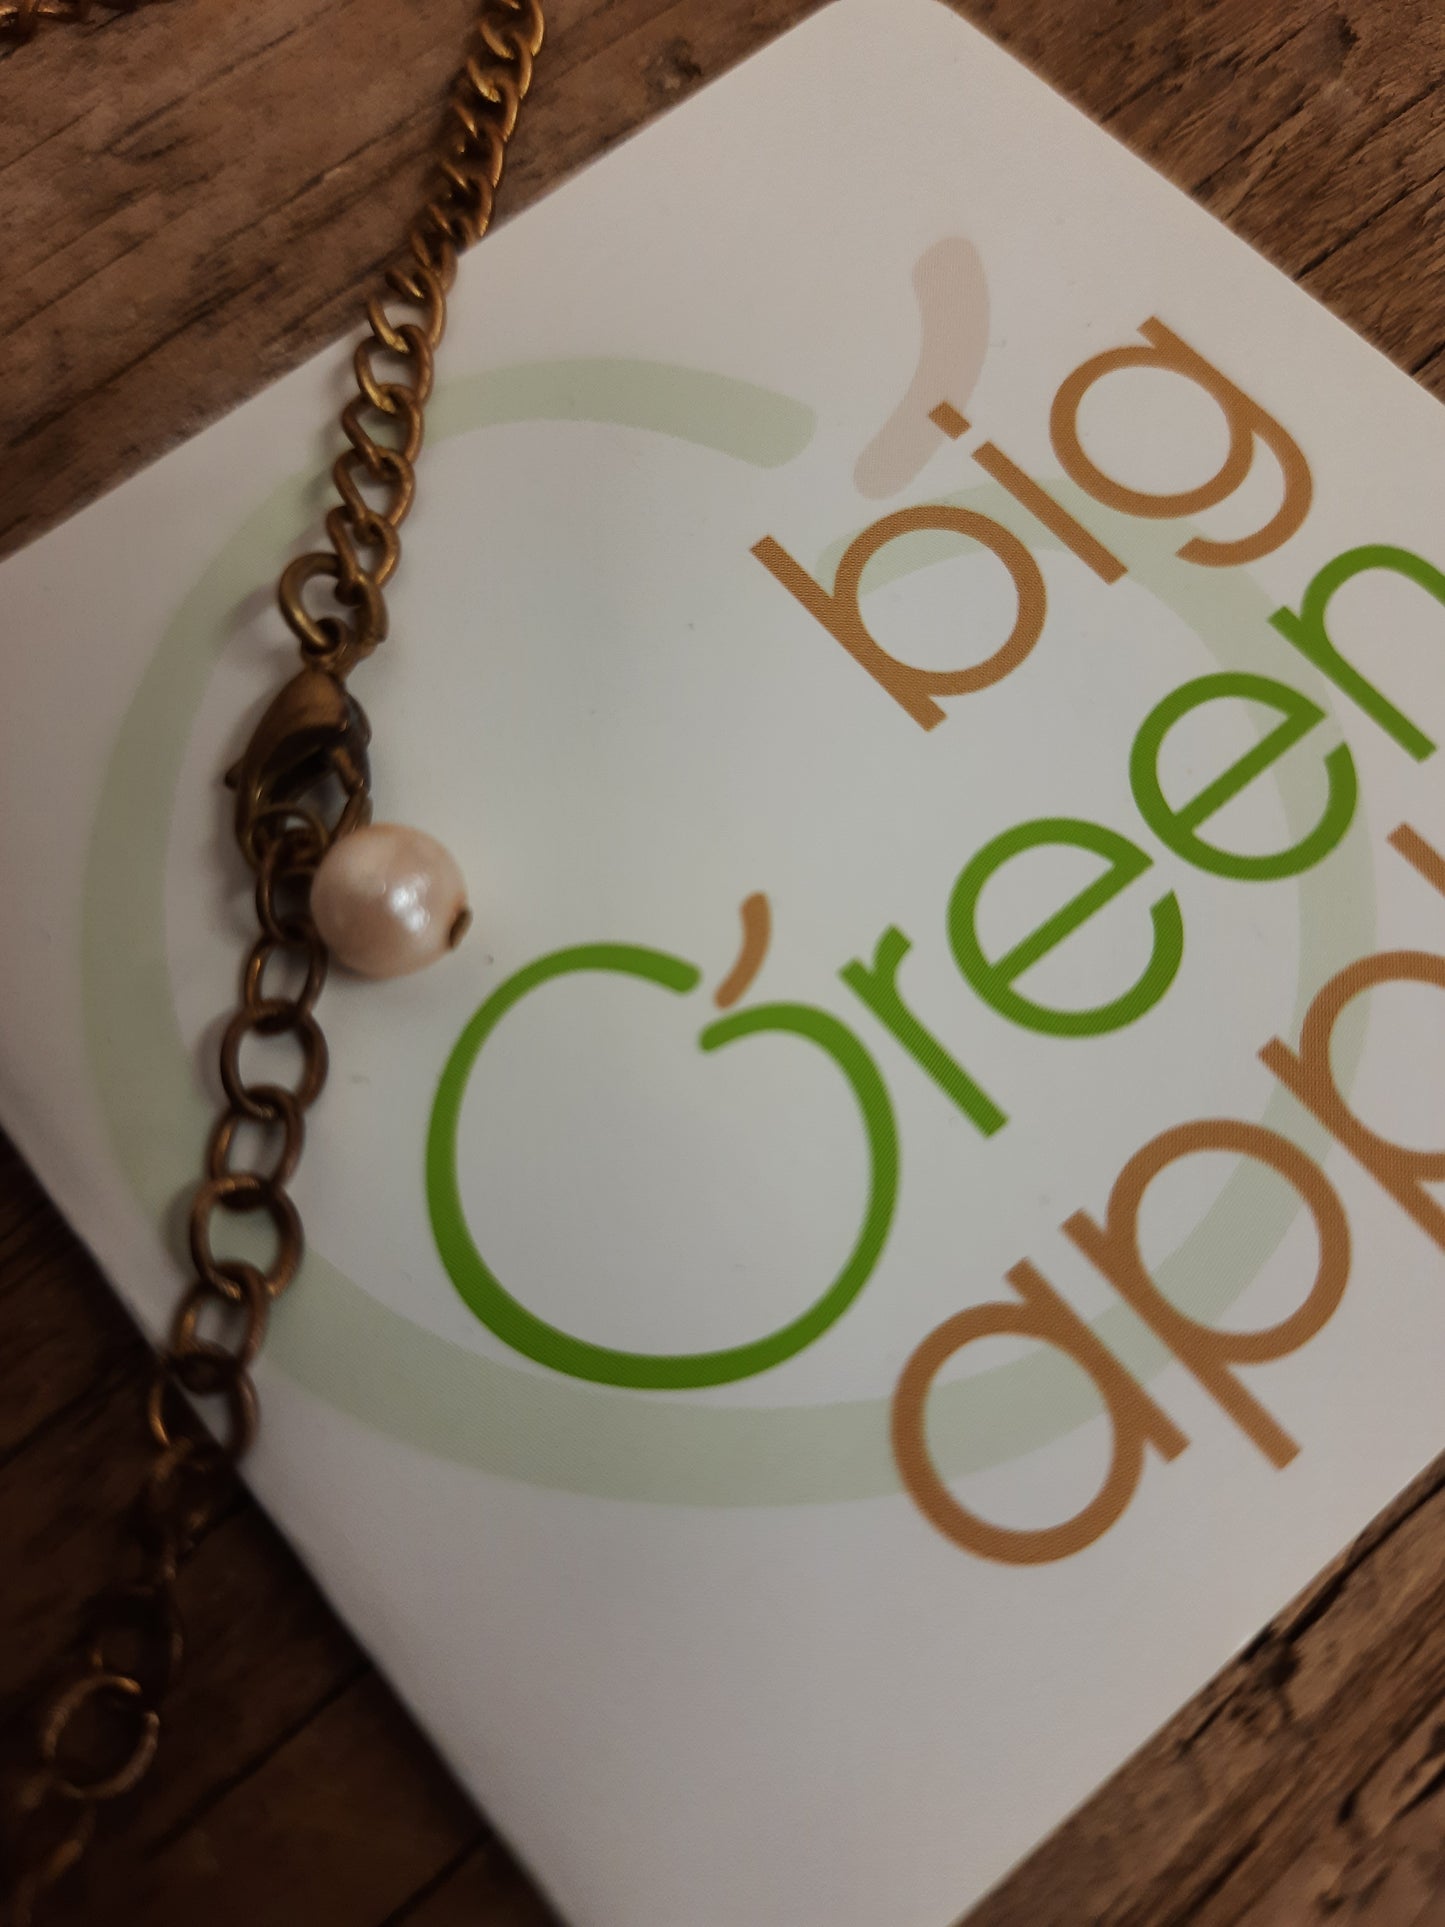 Necklaces, Eco Shop Online, Fair Trade Jewellery, Ethical Presents, BIG GREEN APPLE